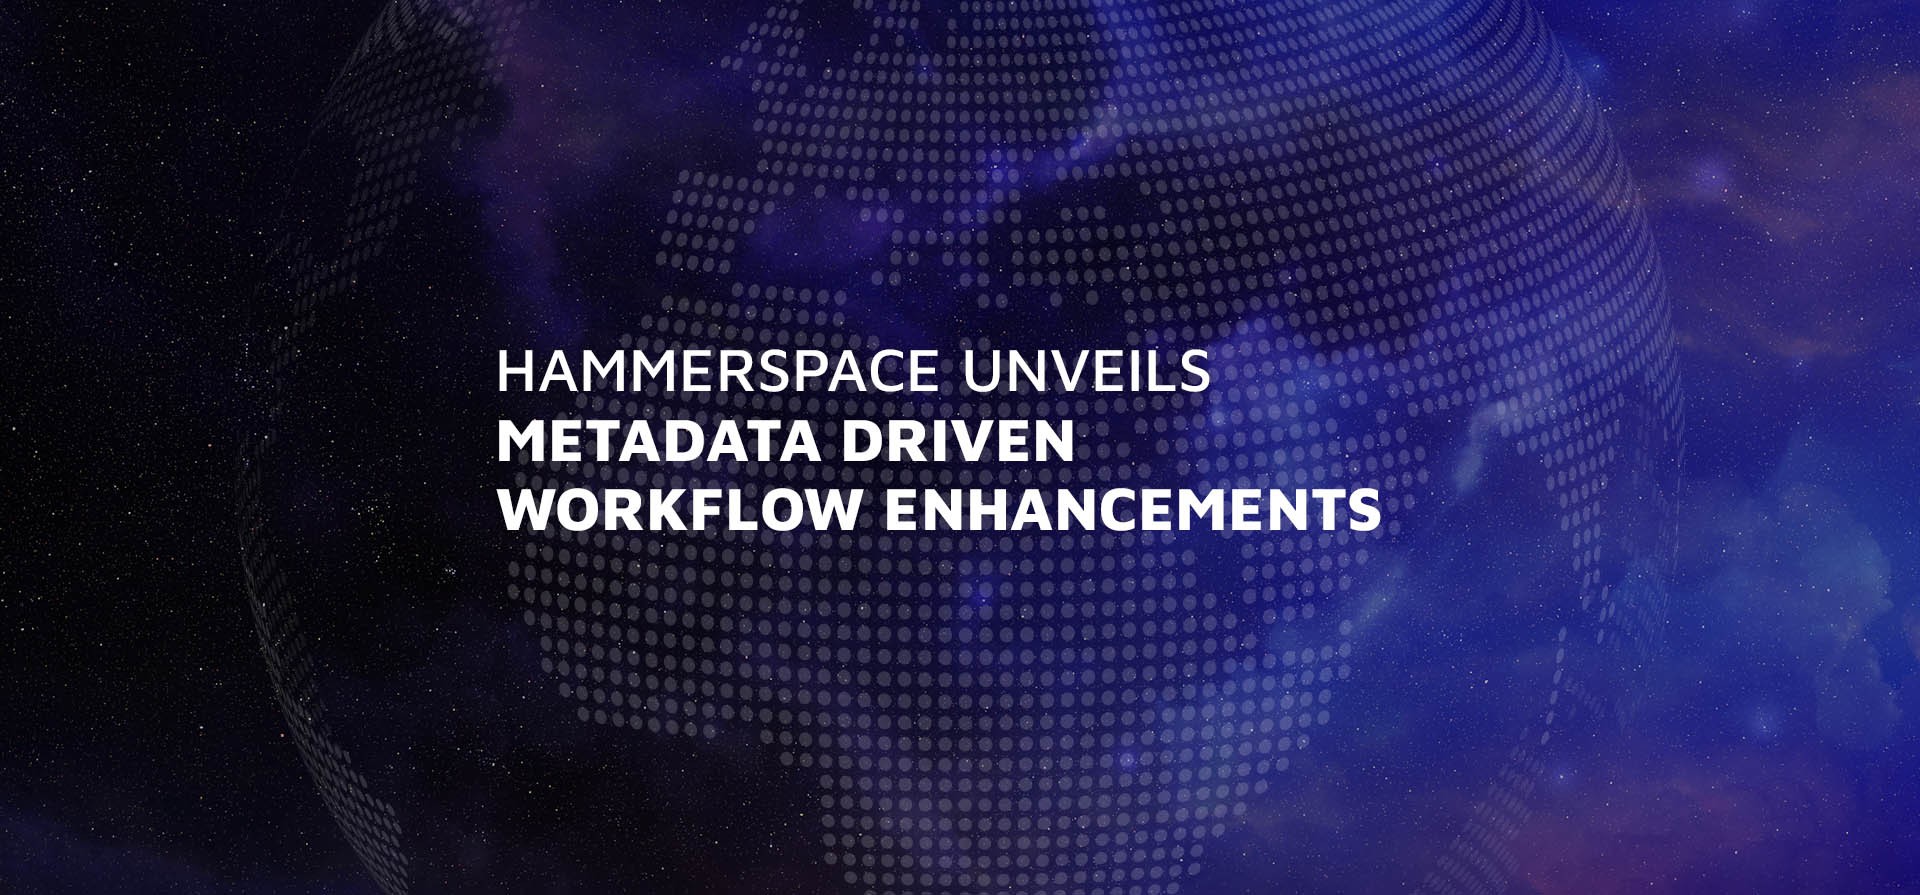 Hammerspace Unveils New Global Data Environment Capabilities to Further Simplify, Automate and Secure Access to Global Data